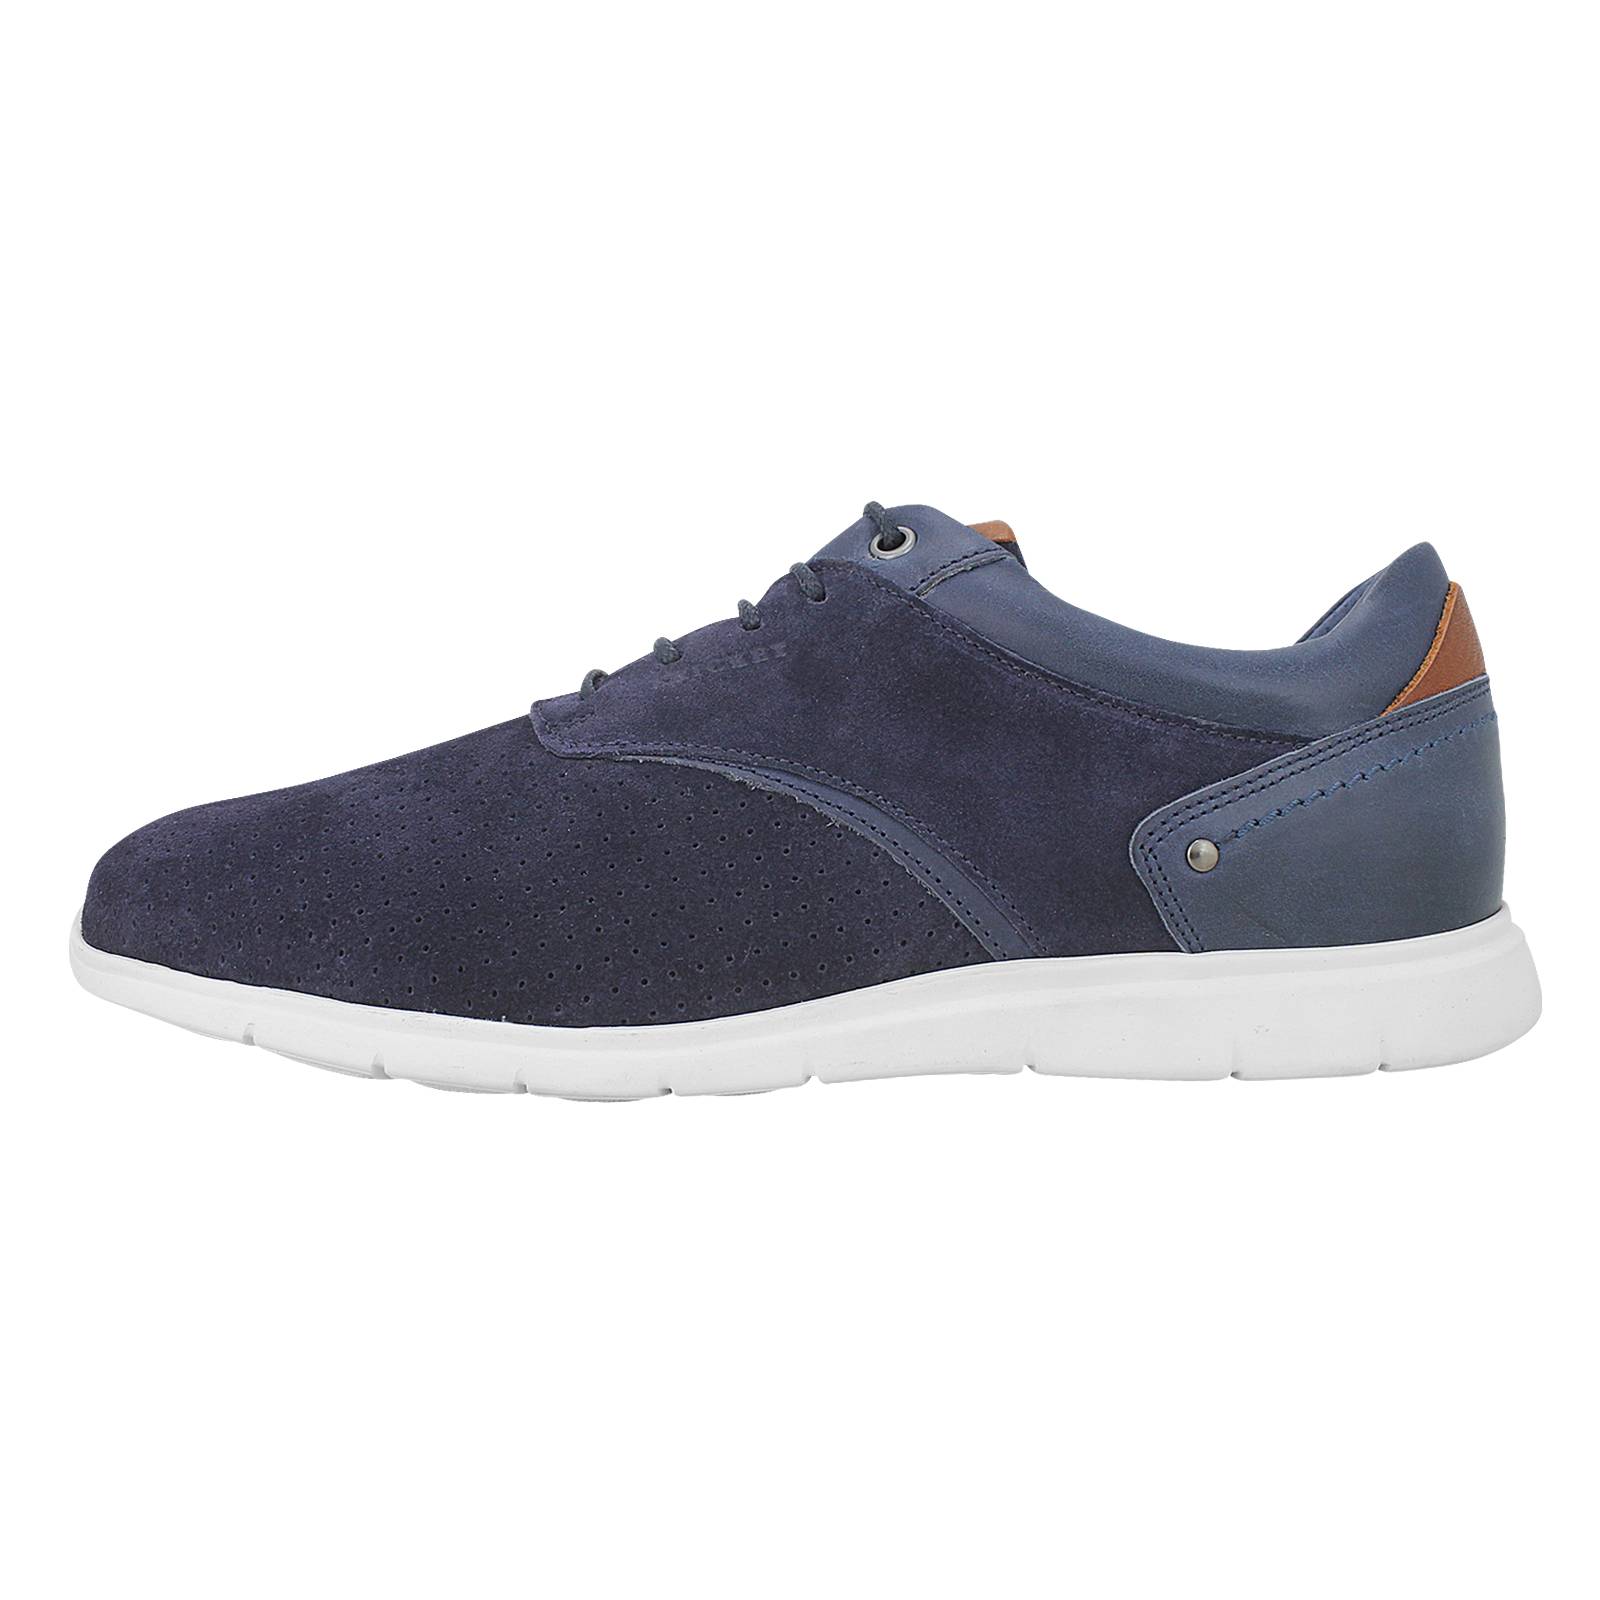 Cornedo - Kricket Men's casual shoes made of perforated suede, suede ...